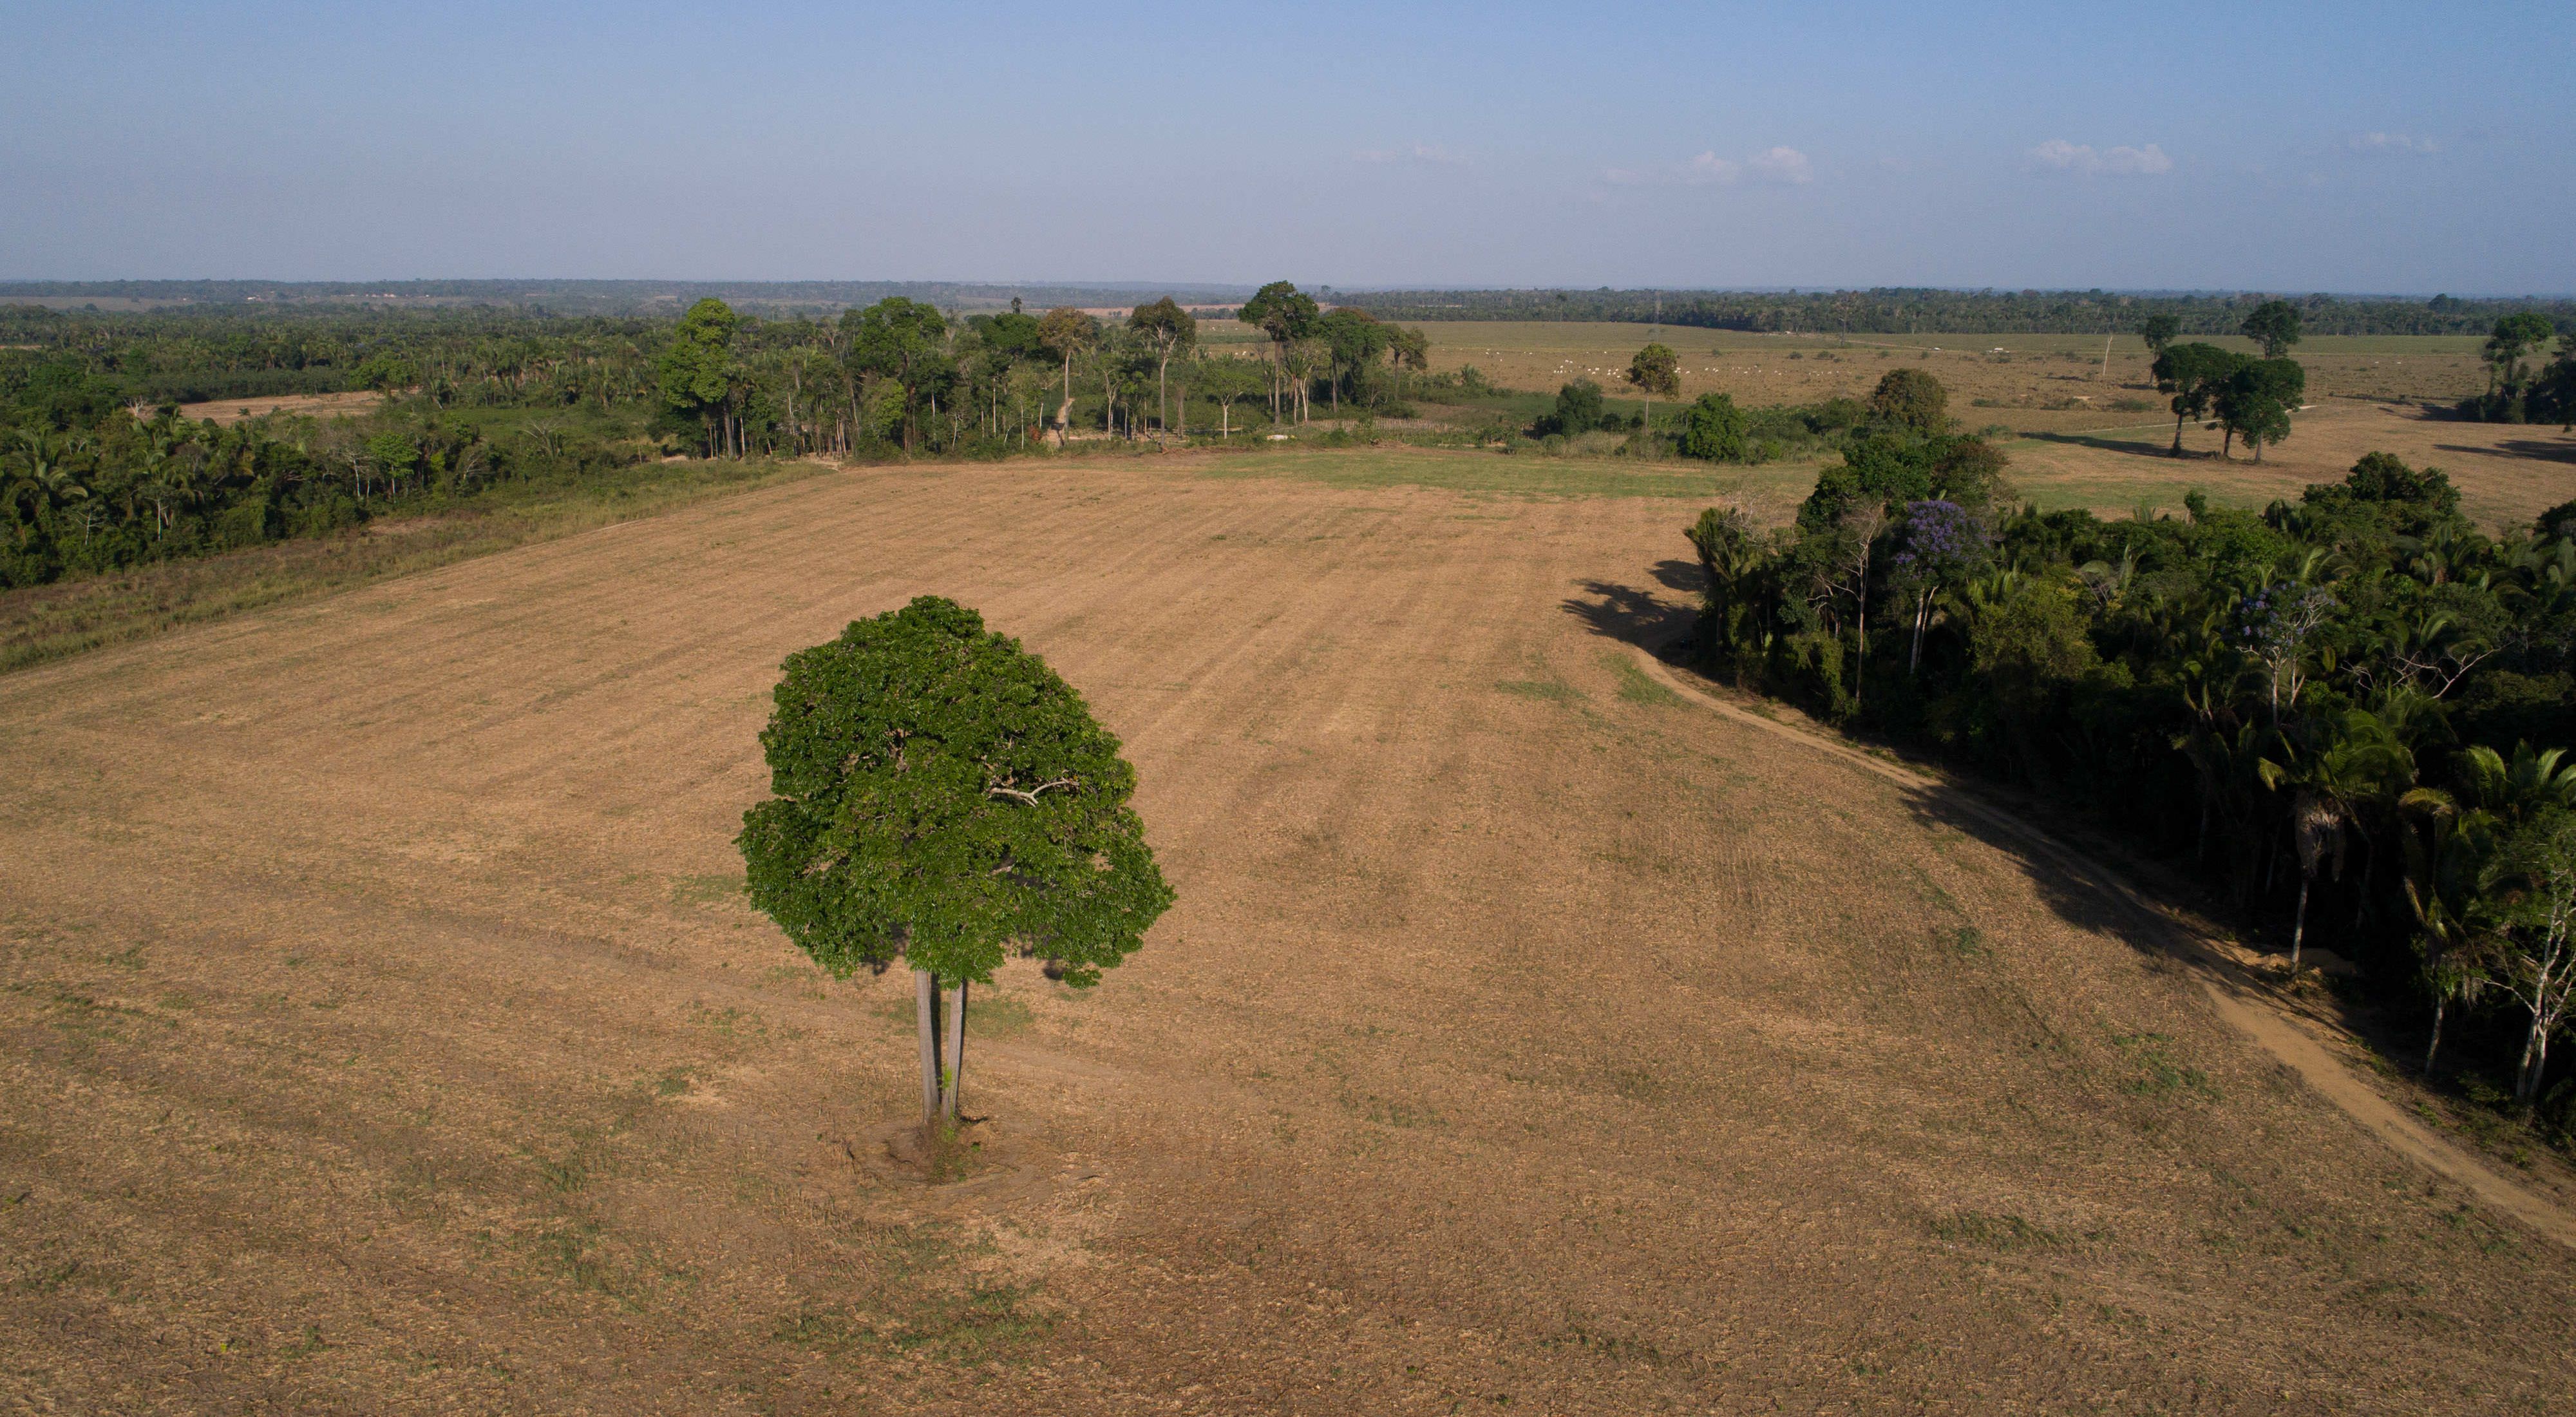 A lone tree stands in a field otherwise cleared of forest, surrounded by stands of trees.